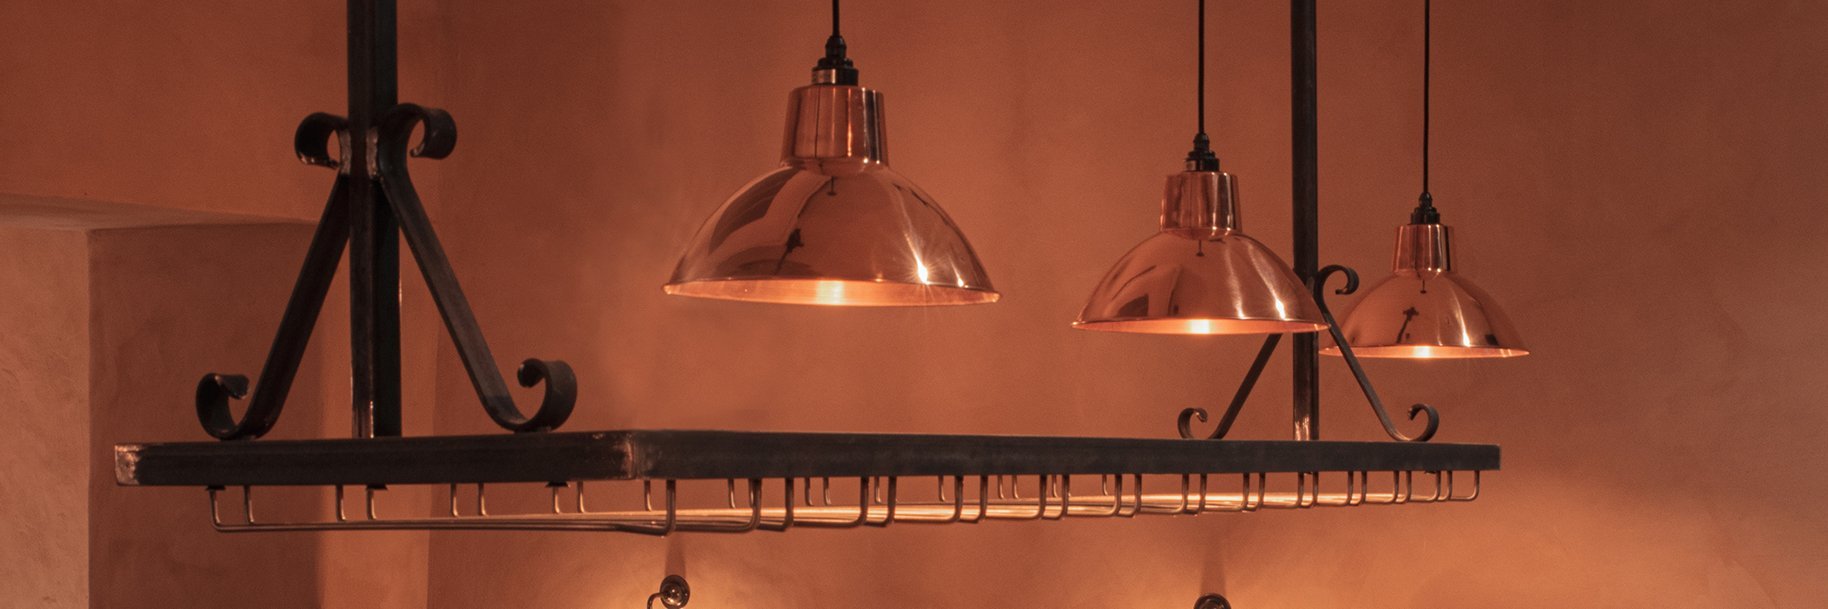 Sleek metal industrial lighting casting a warm glow over a countertop, perfect for both commercial and domestic spaces.